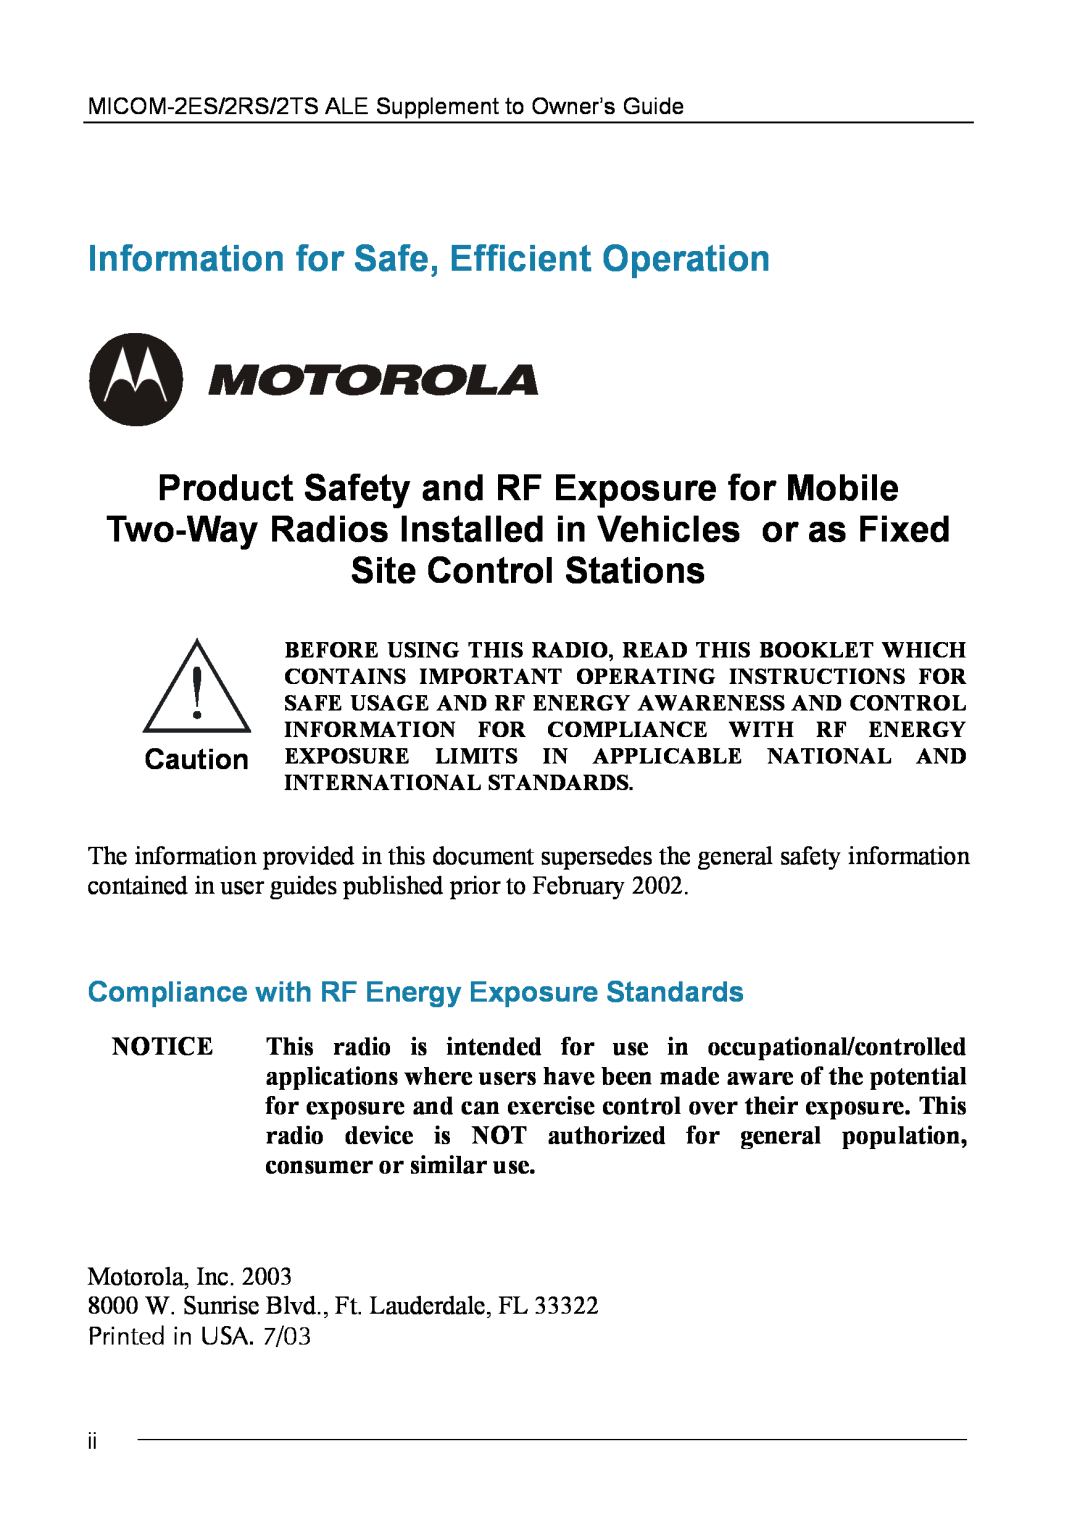 Motorola MICOM-2ES/2RS/2TS ALE manual Information for Safe, Efficient Operation, Product Safety and RF Exposure for Mobile 